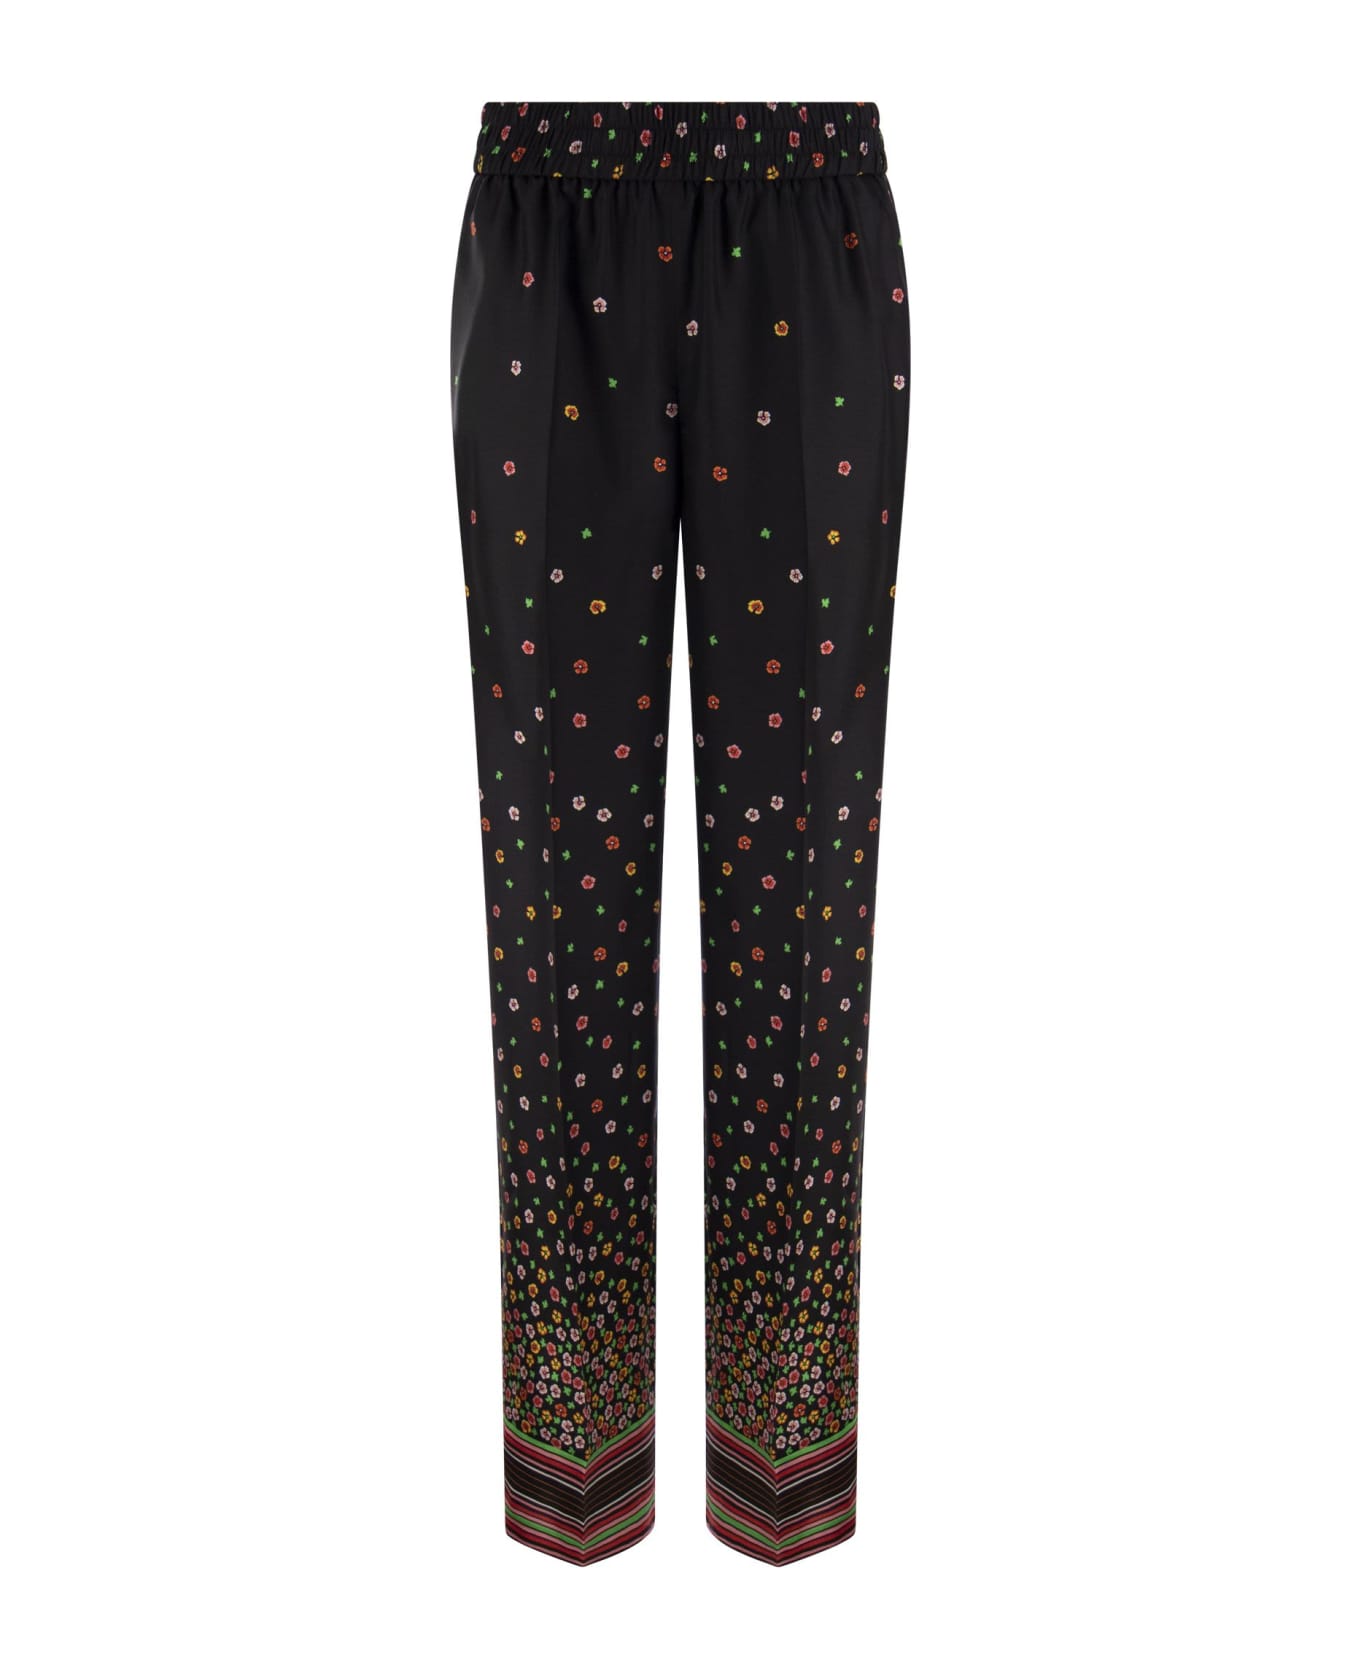 RED Valentino Floral Print Silk Hare Trousers RED Valentino - BLACK